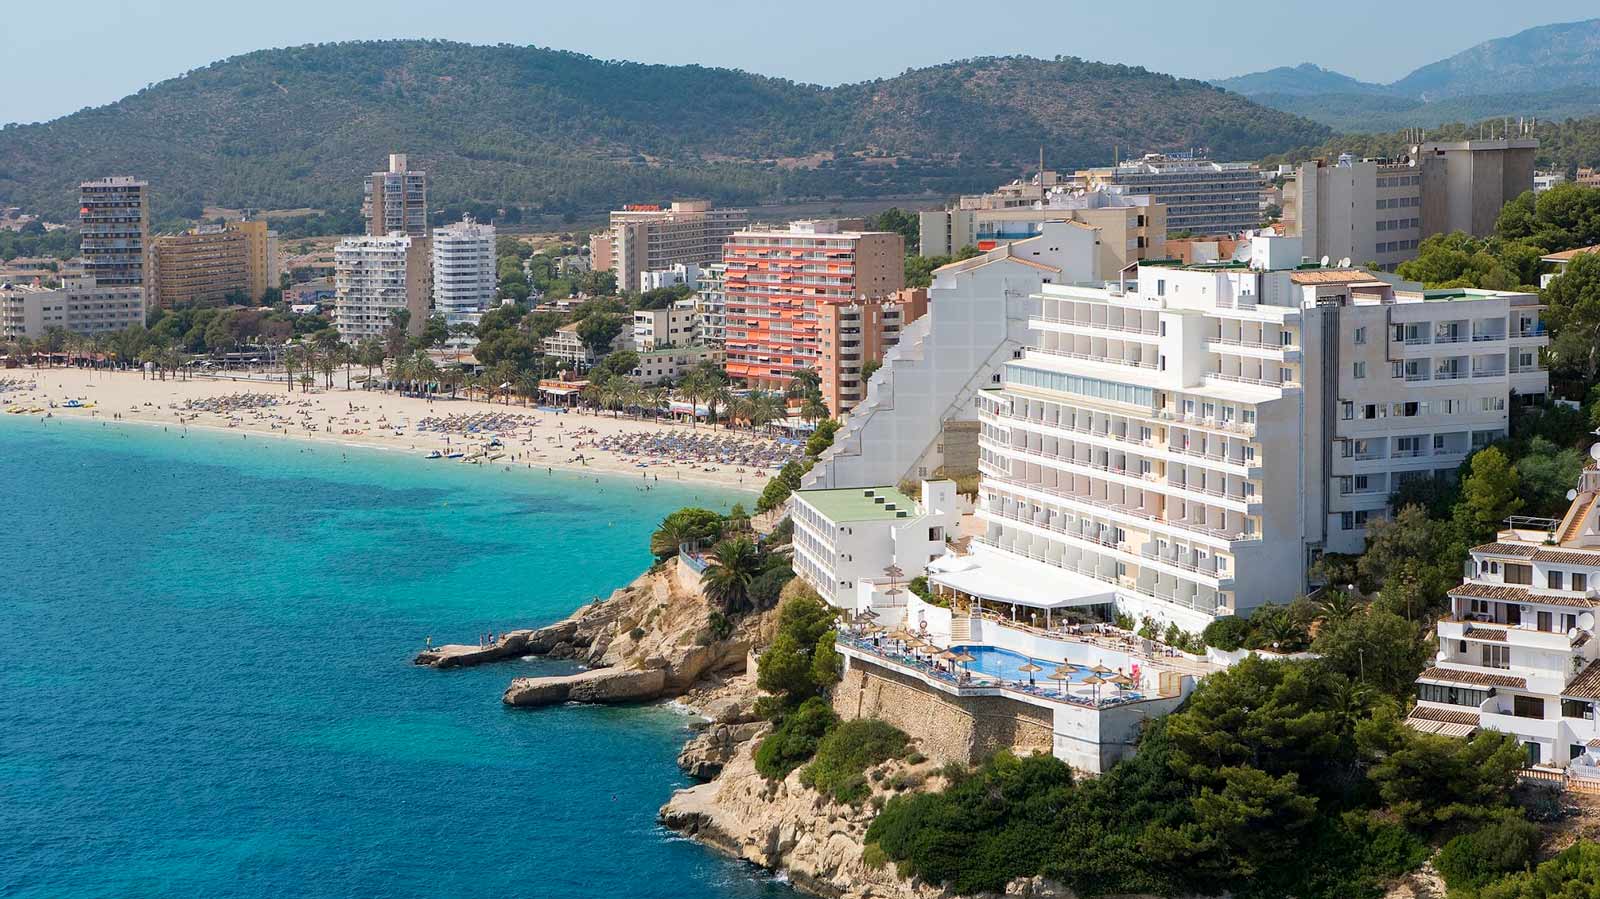 Perverted Hotel Worker Allegedly Ruined Couple's Majorca Holiday